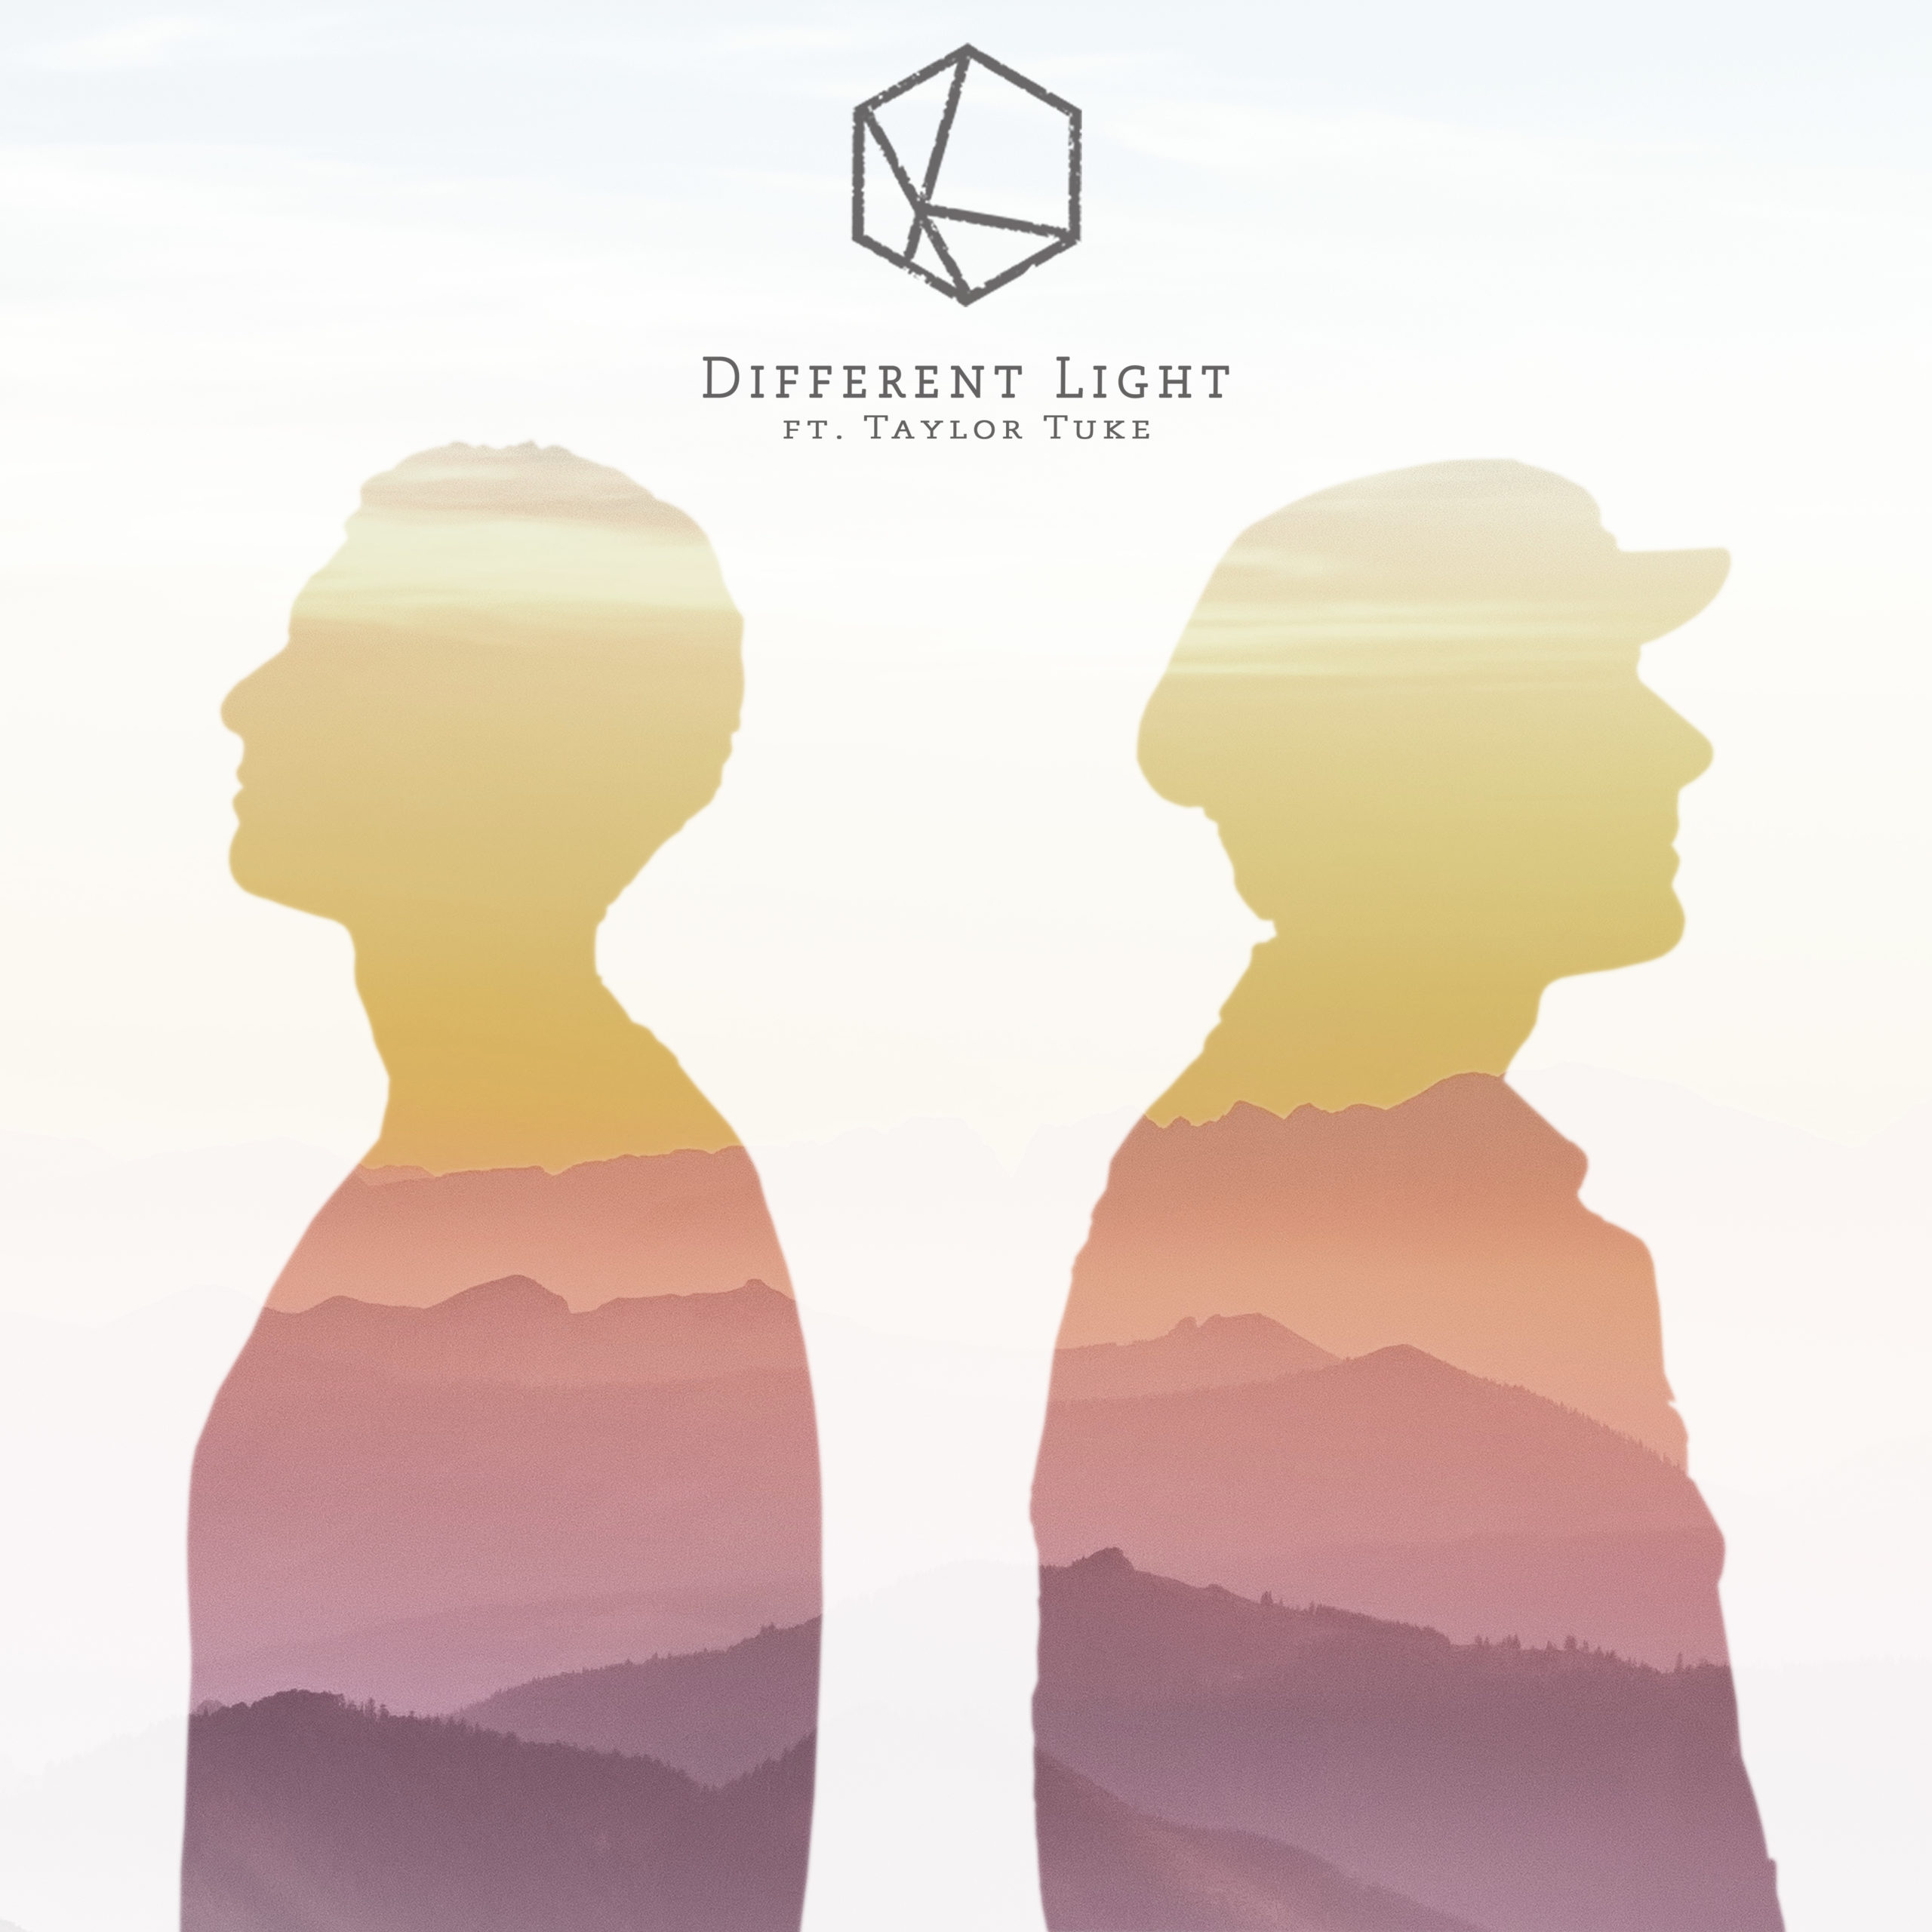 Kerala Shines with New Single “Different Light”